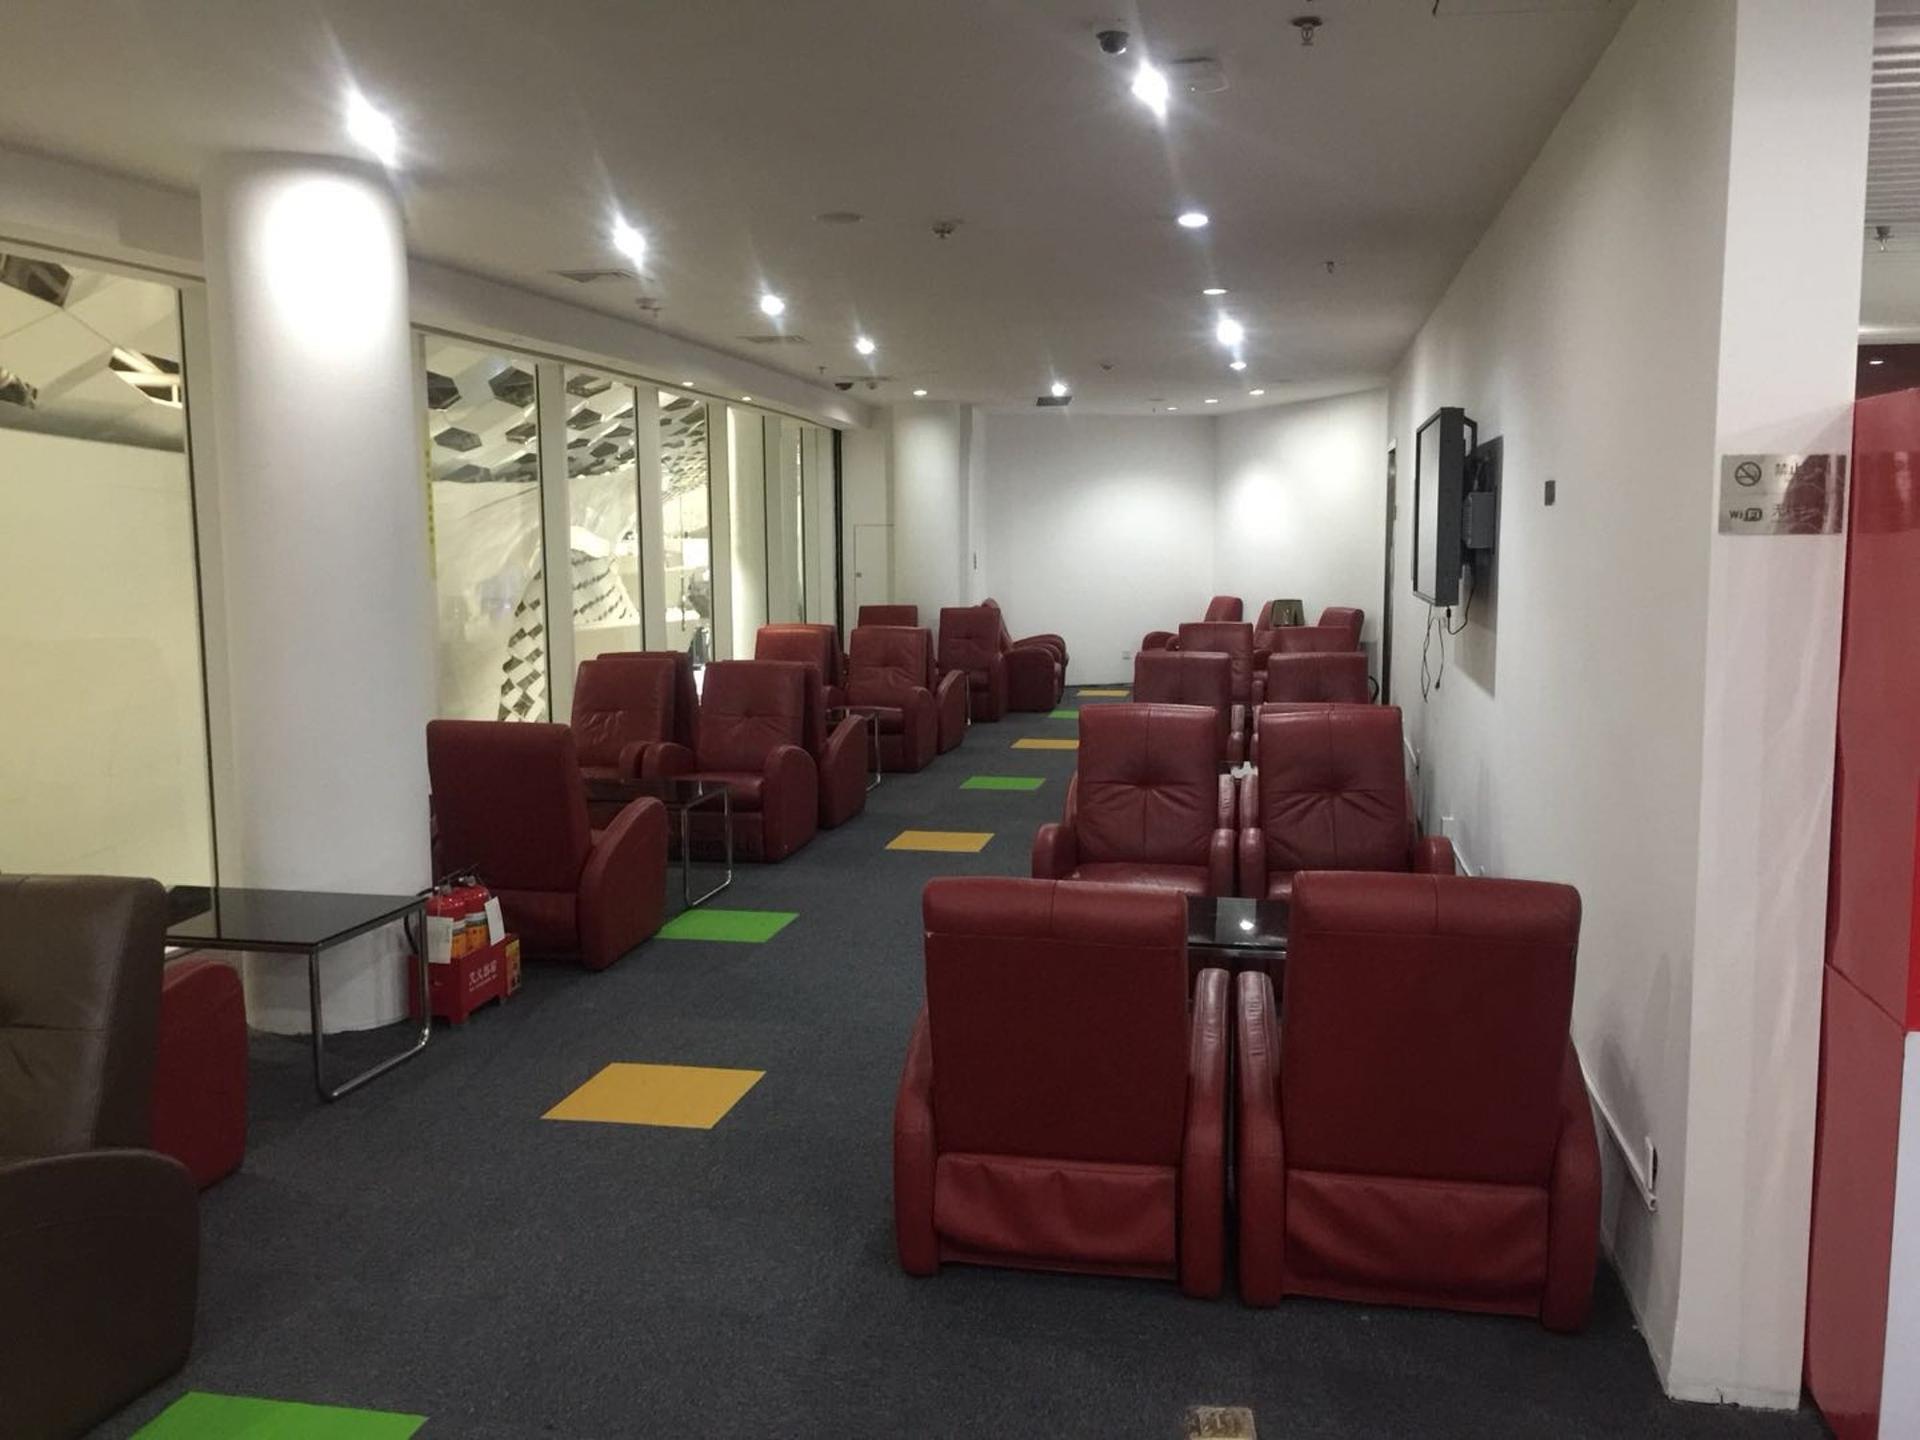 Shenzhen Airport First & Business Class Lounge (Joyee 1) (Closed For Renovation - Temporary Location Available) image 8 of 8